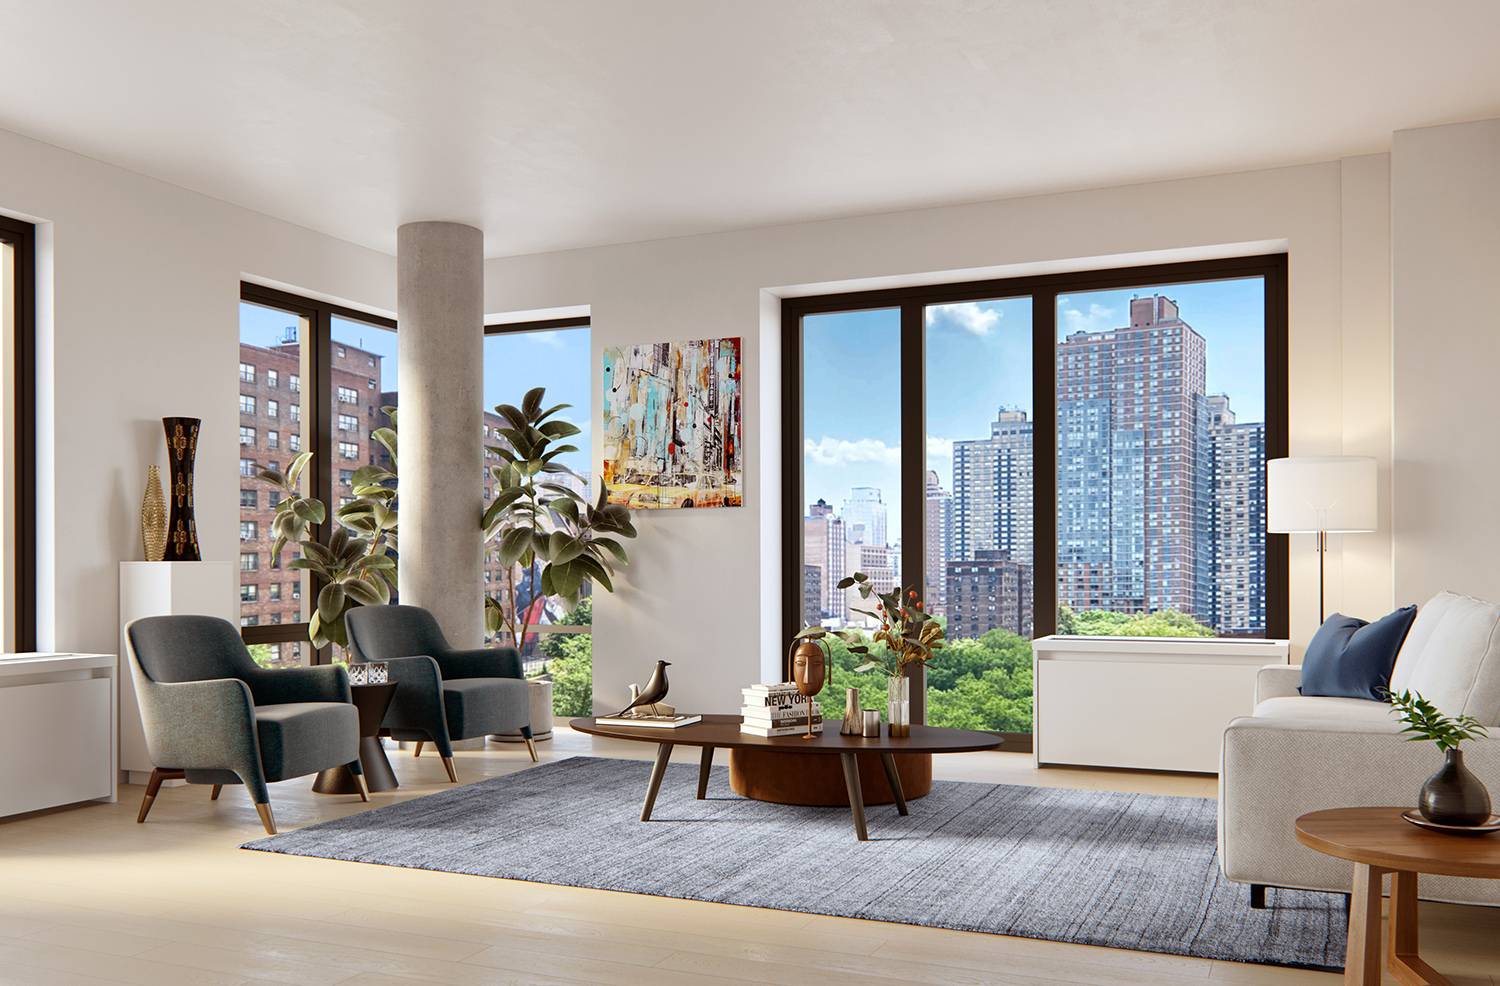 IMMEDIATE OCCUPANCY Move right into this stunning studio home and enjoy a contemporary lifestyle at East Harlem's newest development.